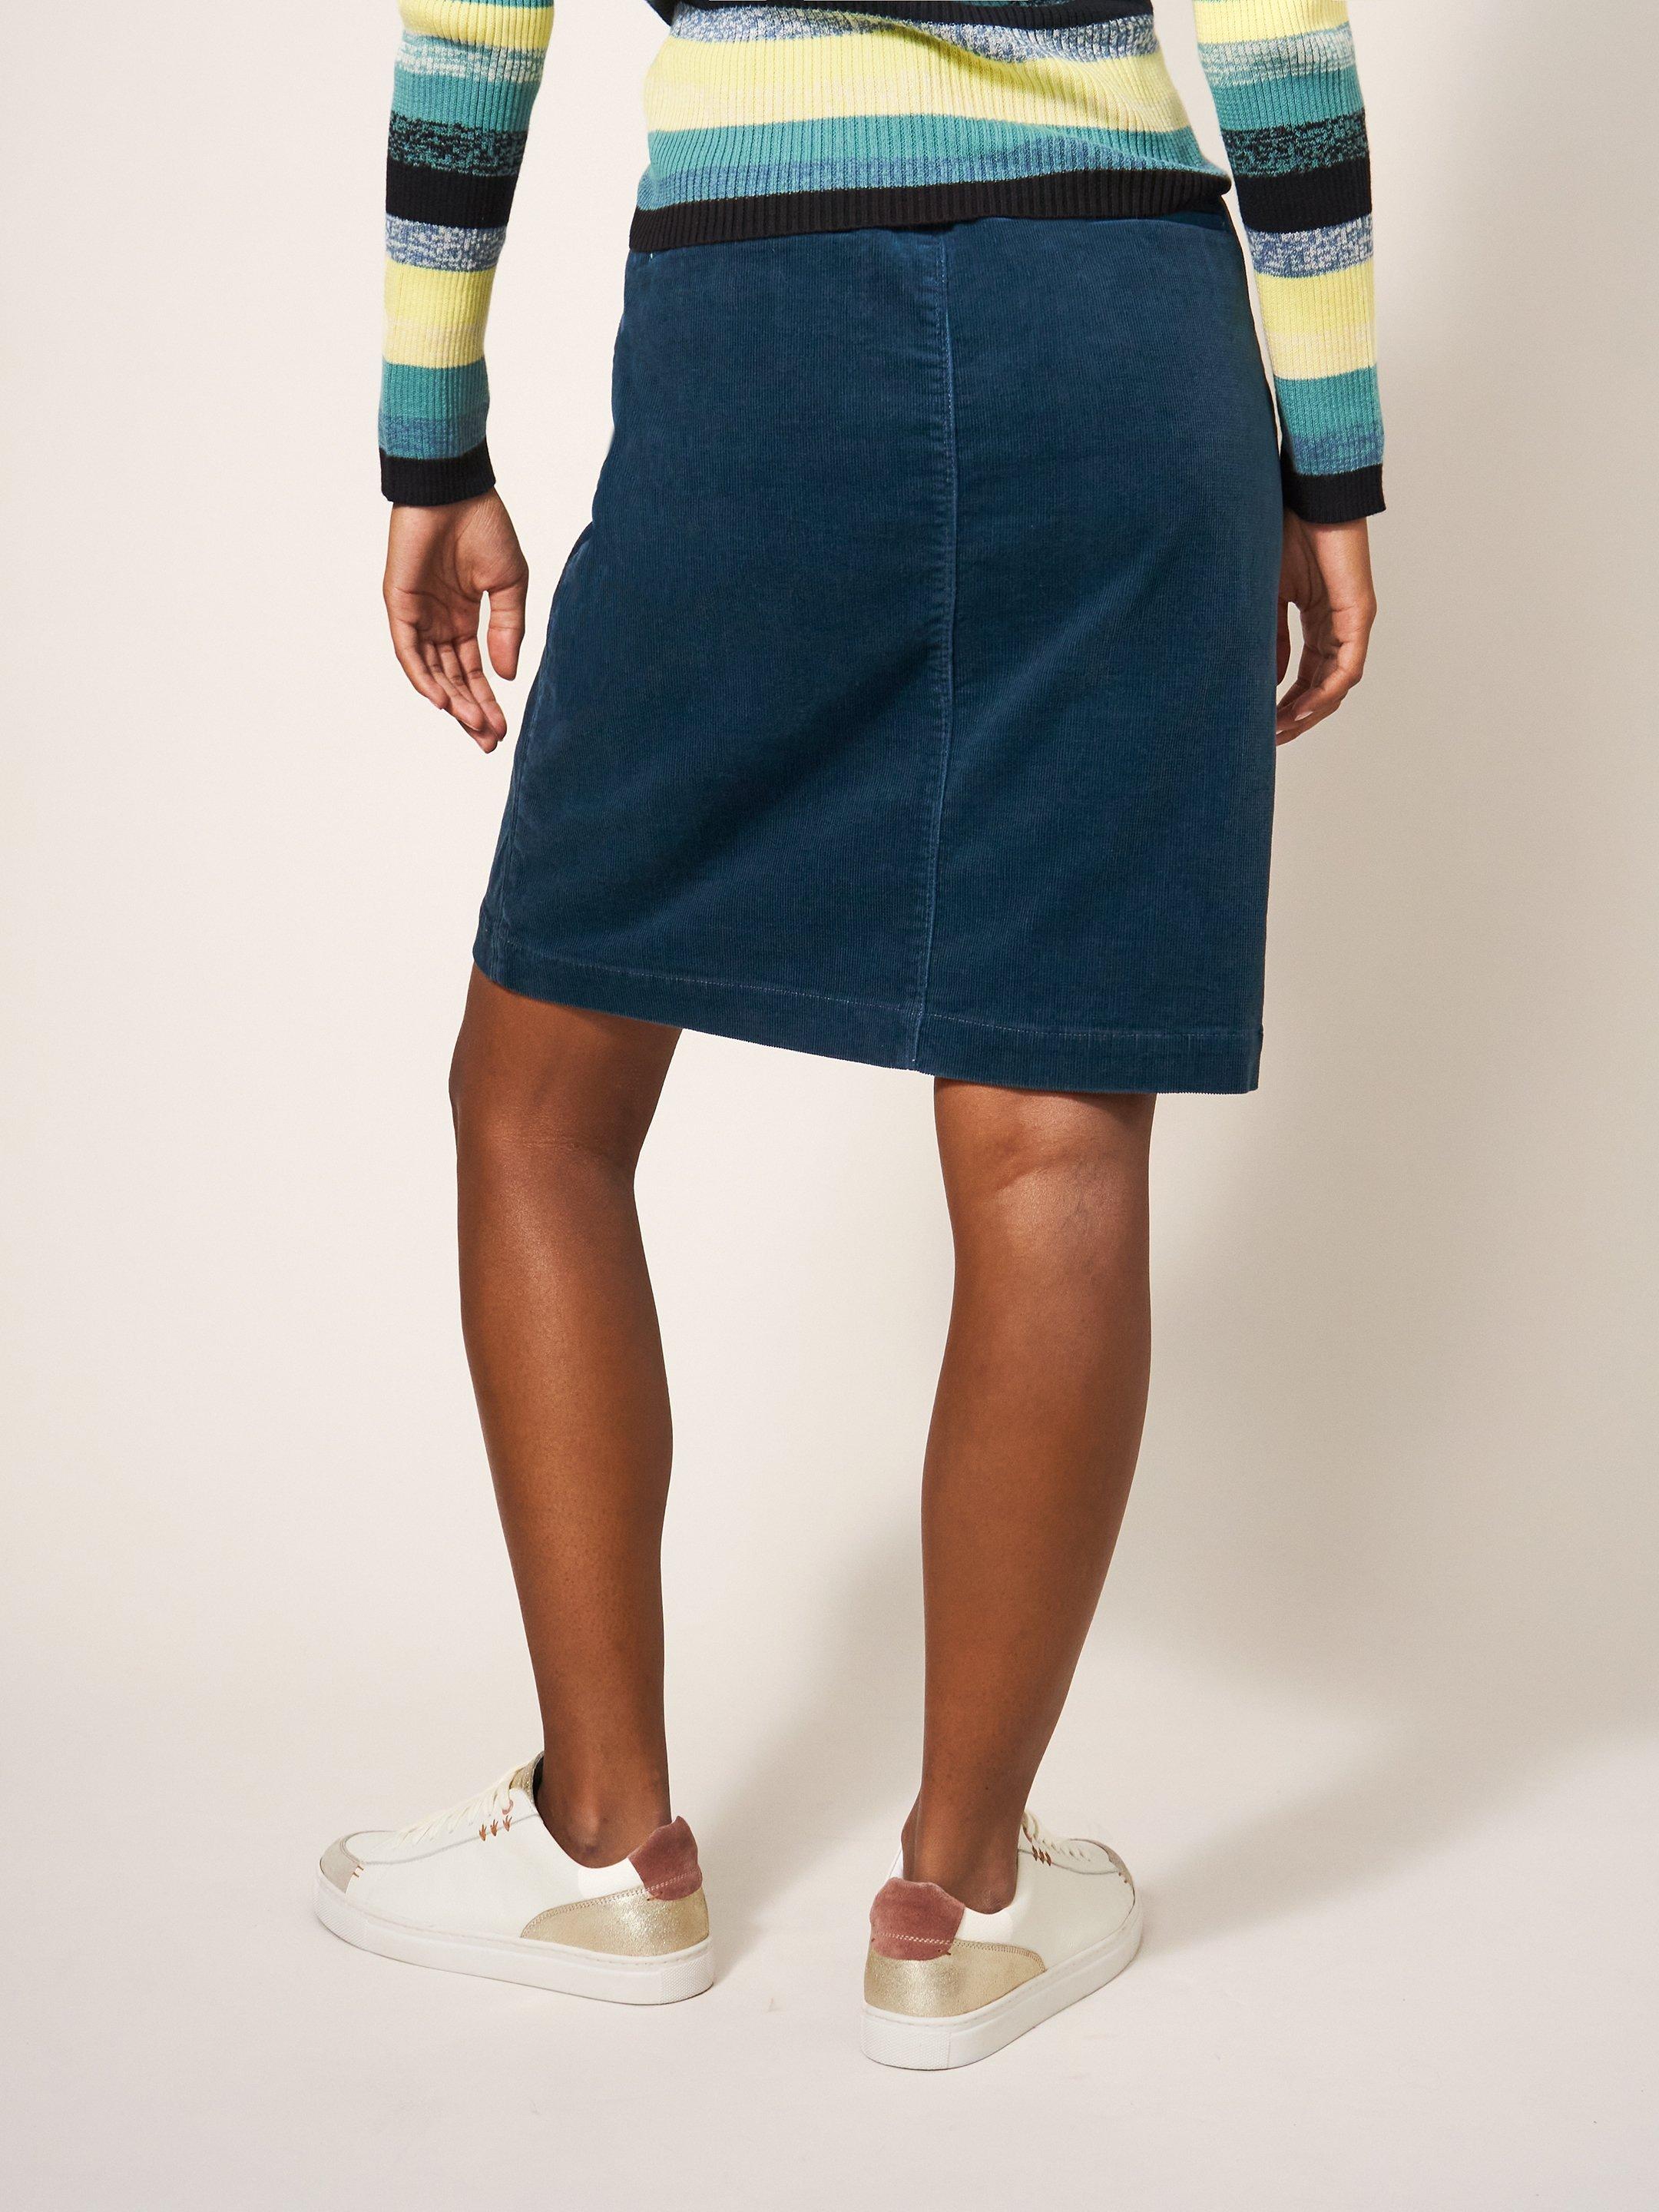 Melody Organic Cord Skirt in DK TEAL - MODEL BACK